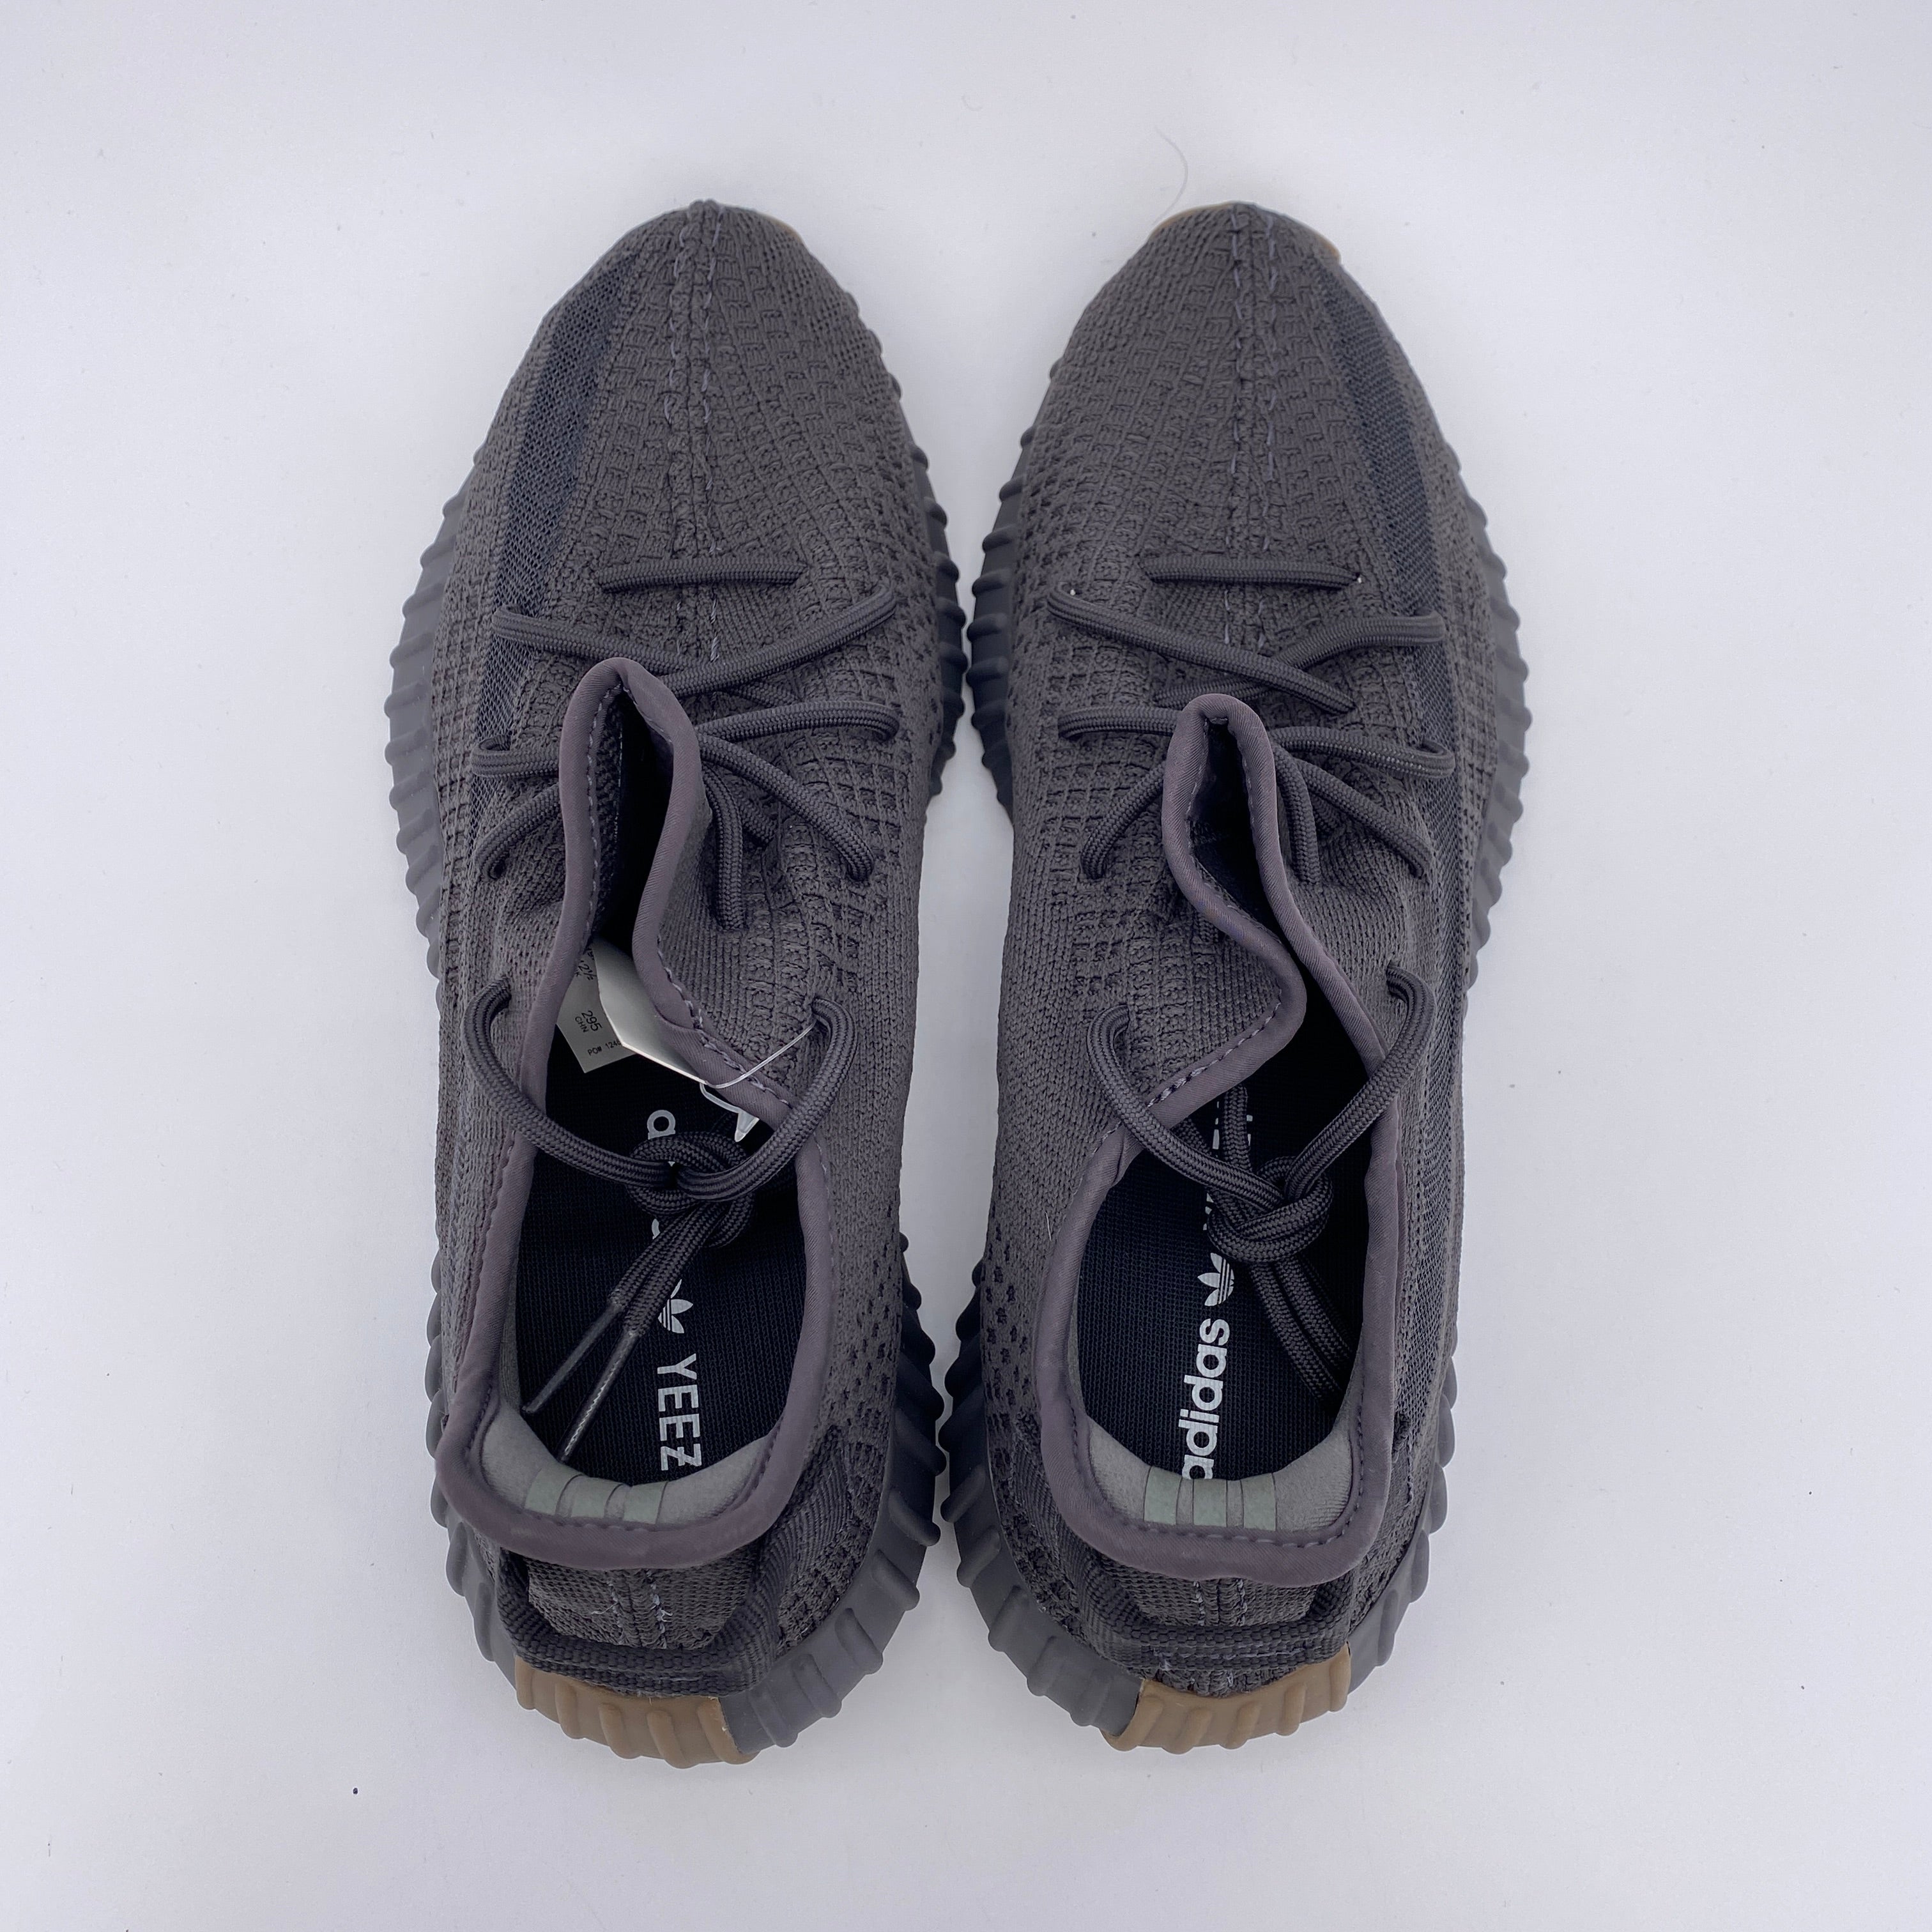 Yeezy 350 v2 &quot;Cinder&quot; 2020 New Size 13